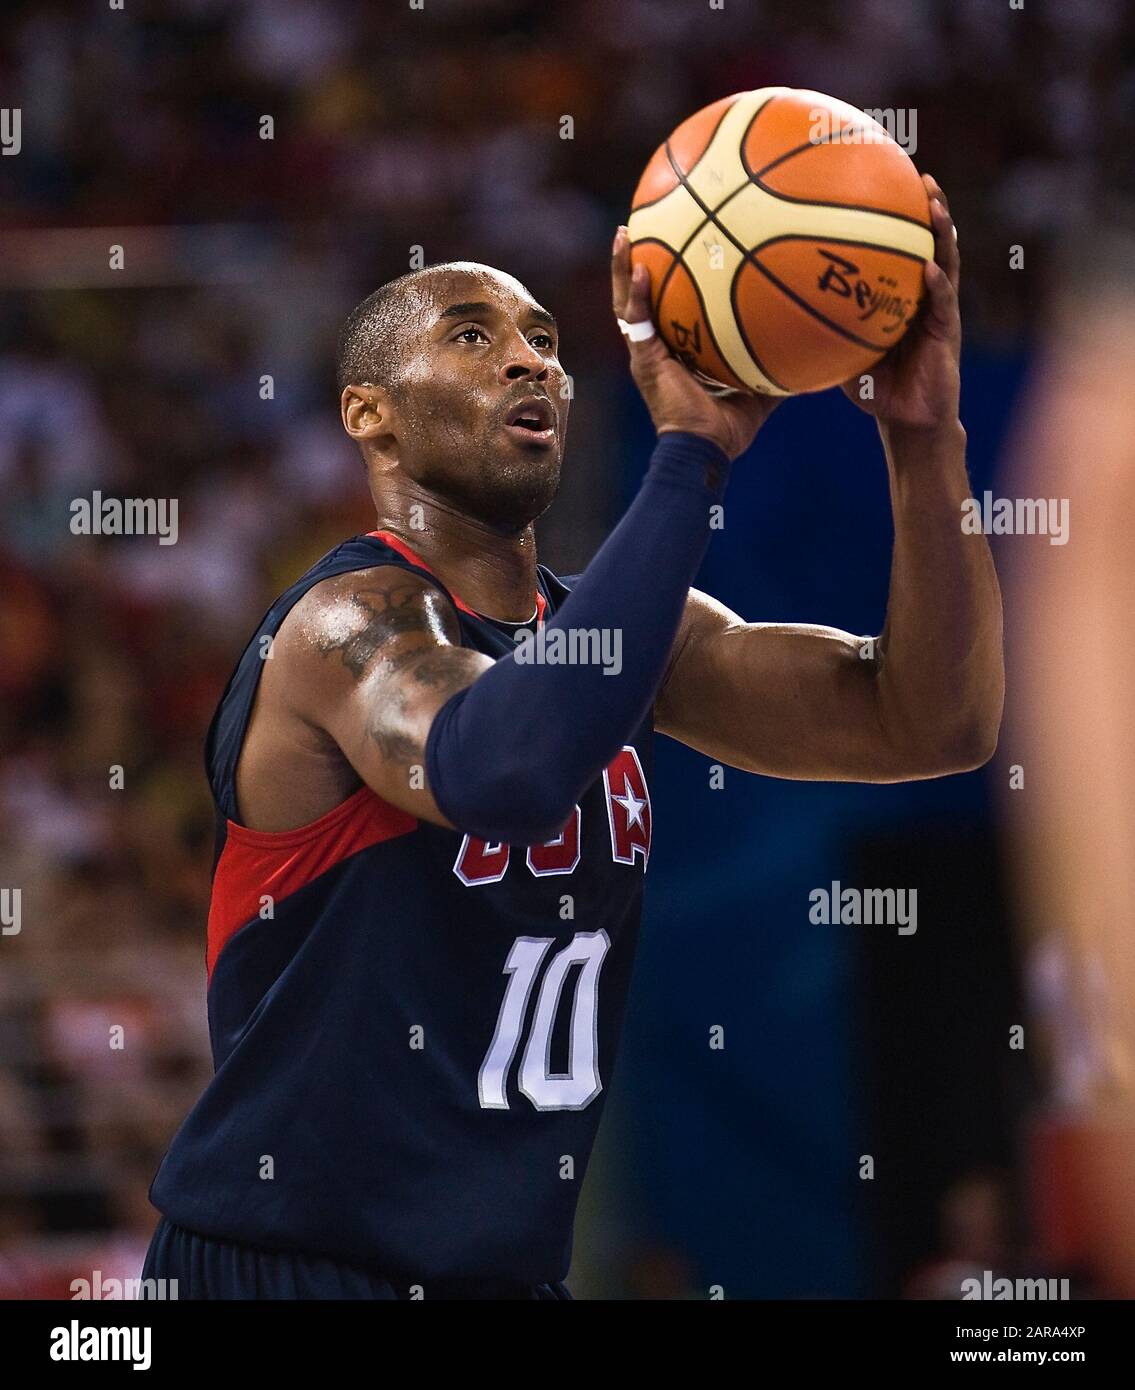 Kobe BRYANT, USA, Action, Spain - USA - ESP - USA 82: 119, 82-19, basketball preliminary round group B group B of men, - 2008 Olympic Games in Beijing Beijing China Aug 16, 2008; 2008 Summer Olympics in Beijing from 08.08 - 24.08.2008 in Beijing/People's Republic of China; | usage worldwide Stock Photo